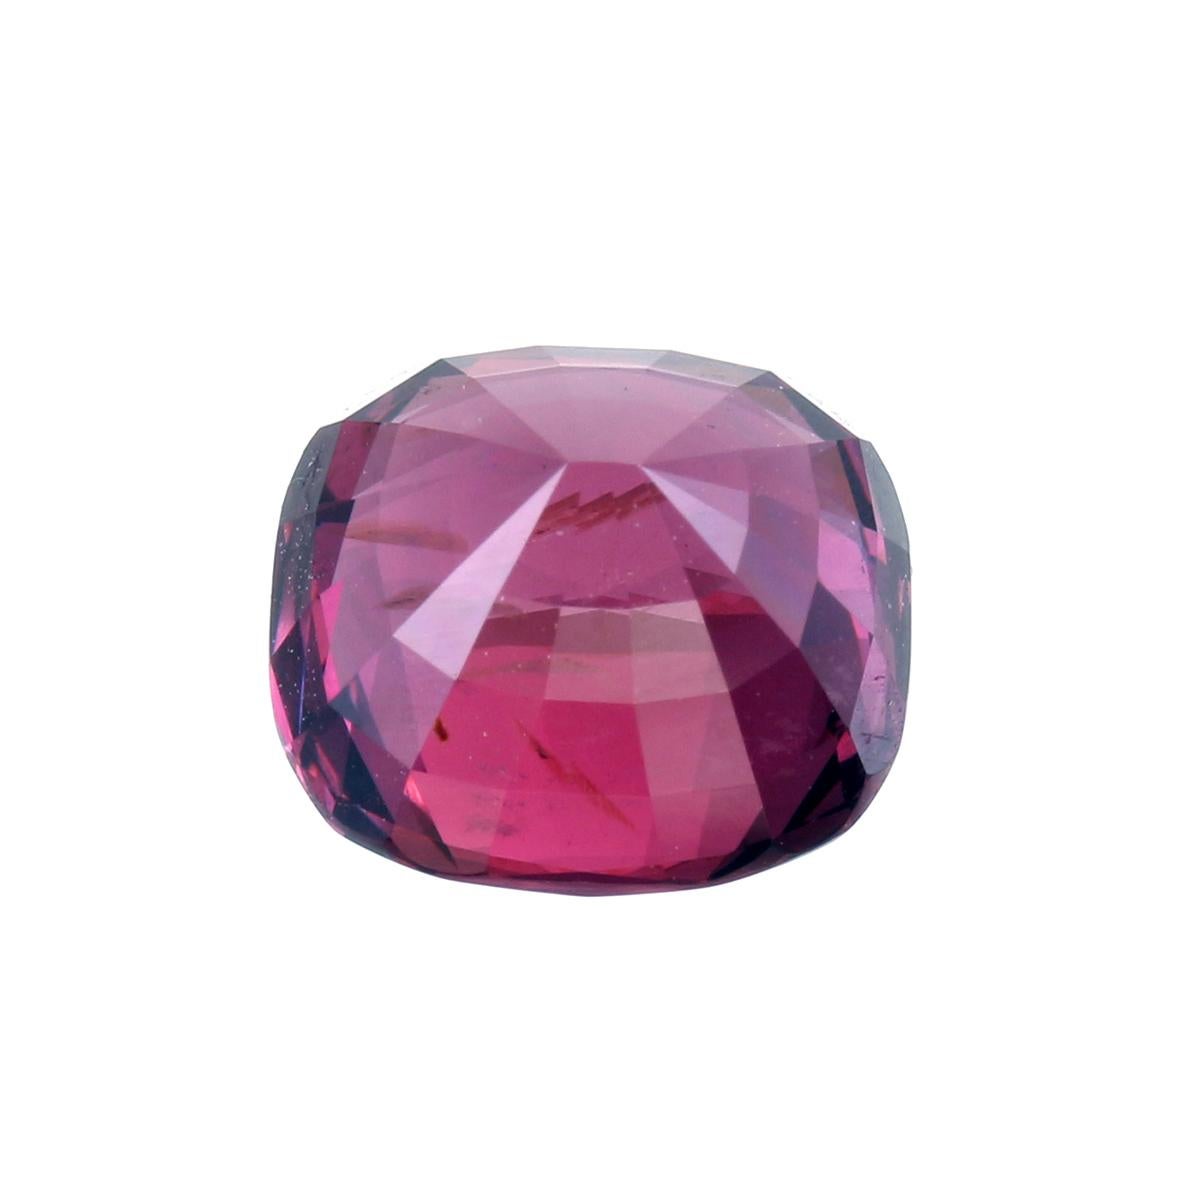 Lotus certified 5.19 carat Red Spinel
Shape: Antique Cushion
Dimensions: 9.79 x 9.30 x 7.12 mm
Color: Rich Red with a Deep to medium tone
No indication of heating/treatment
Lotus Report No :5092-3224   pin 507916 to see the hole certificate go to